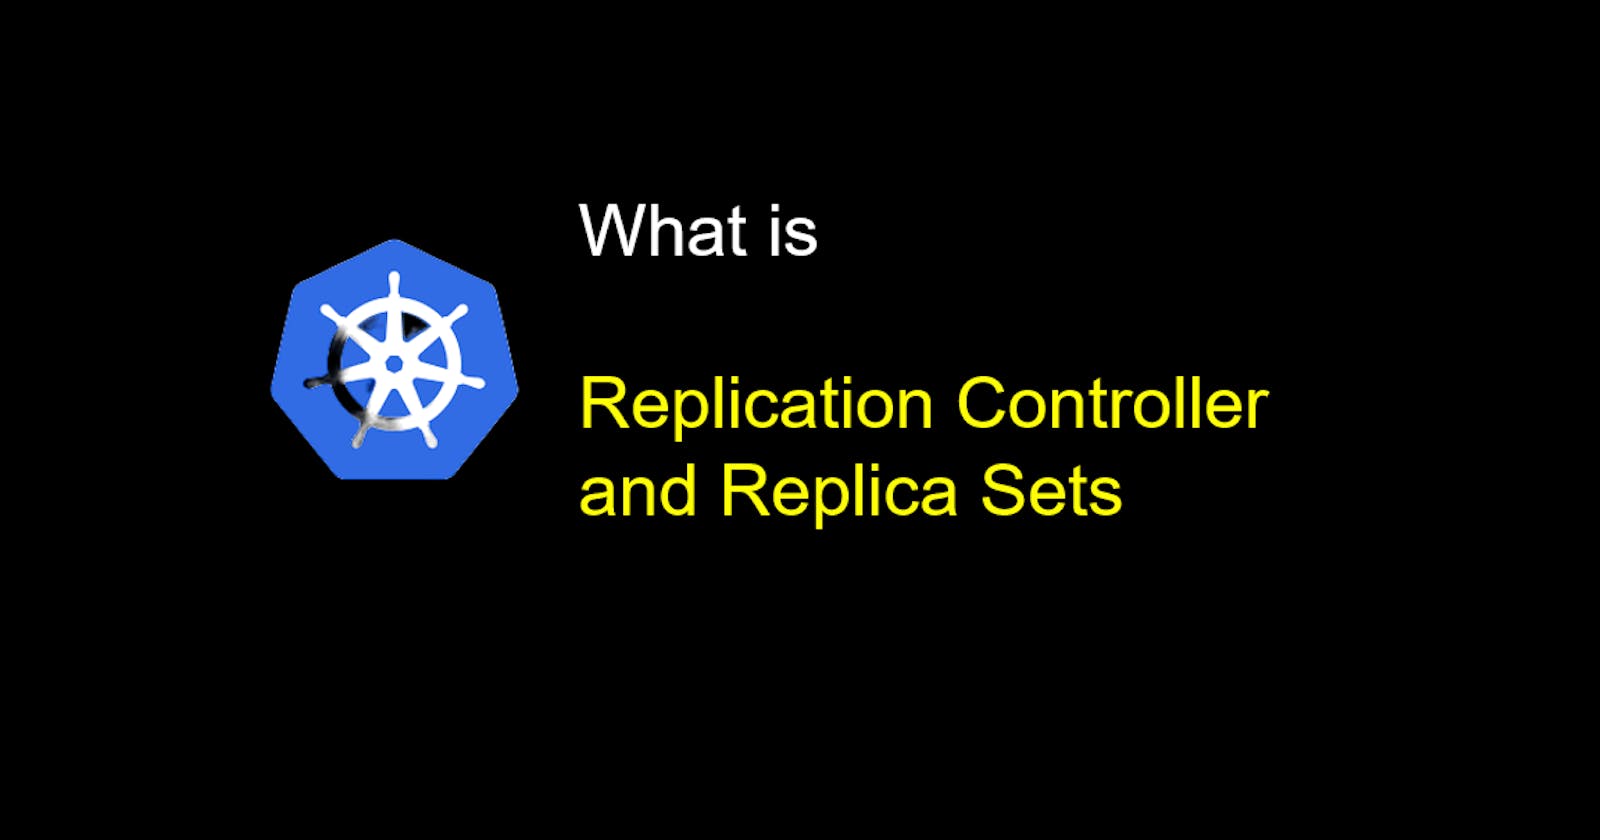 Kubernetes Concepts - ReplicationController and Replica Sets